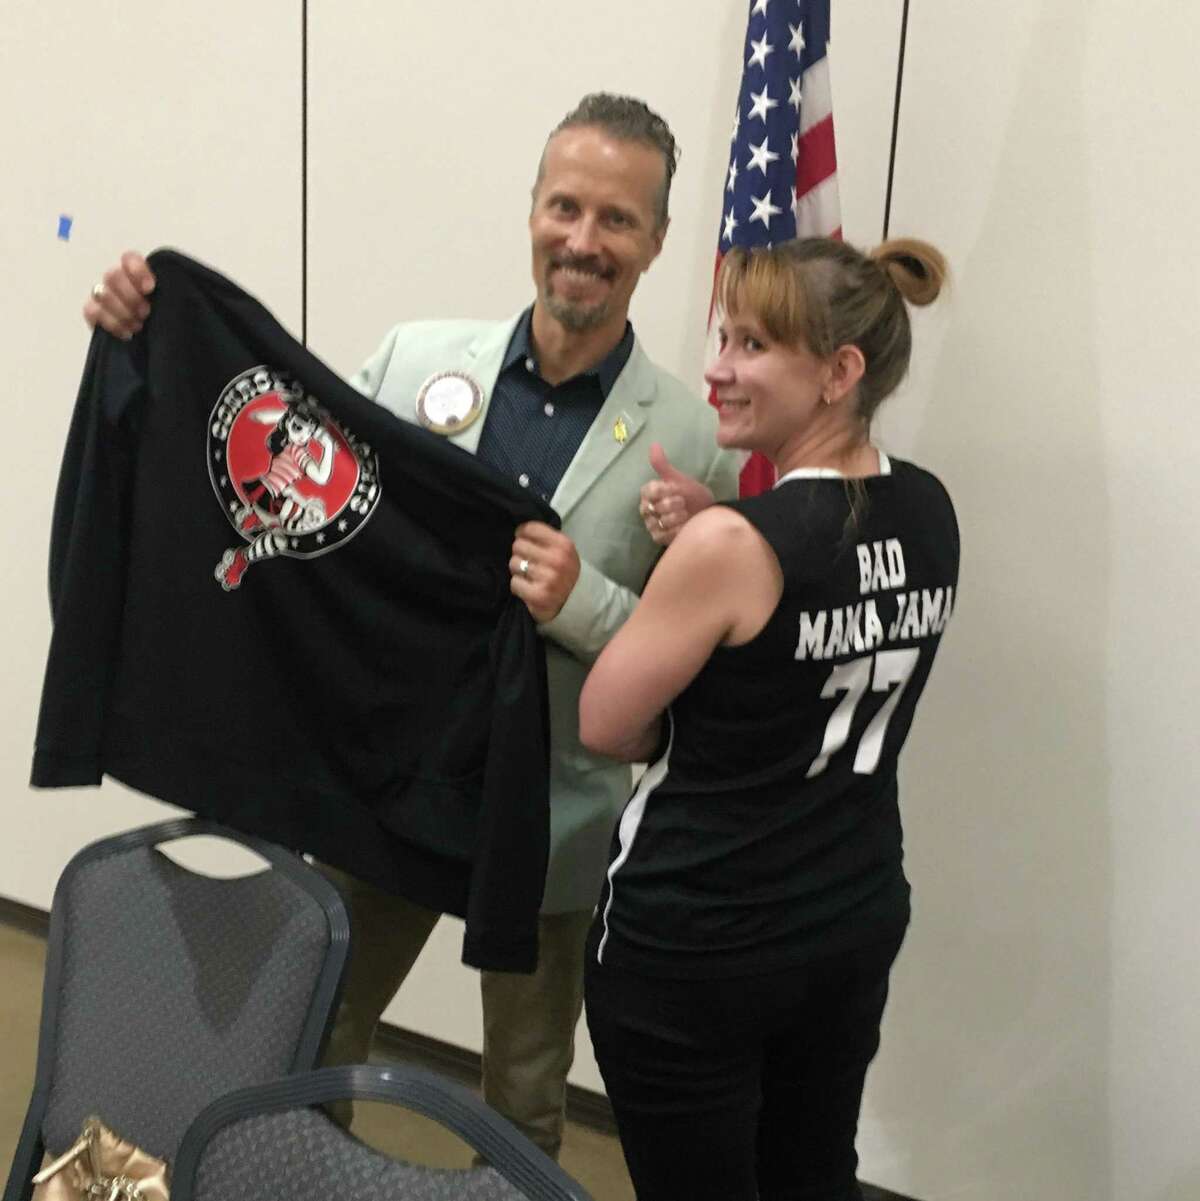 The Conroe Noon Lions Club and Program Chair Mike Sproba (l) welcomed Mary Keating (r), AKA ‘Bad Mama Jama’, who gave a bang-up program about Roller Derby and the Conroe Cutthroats.